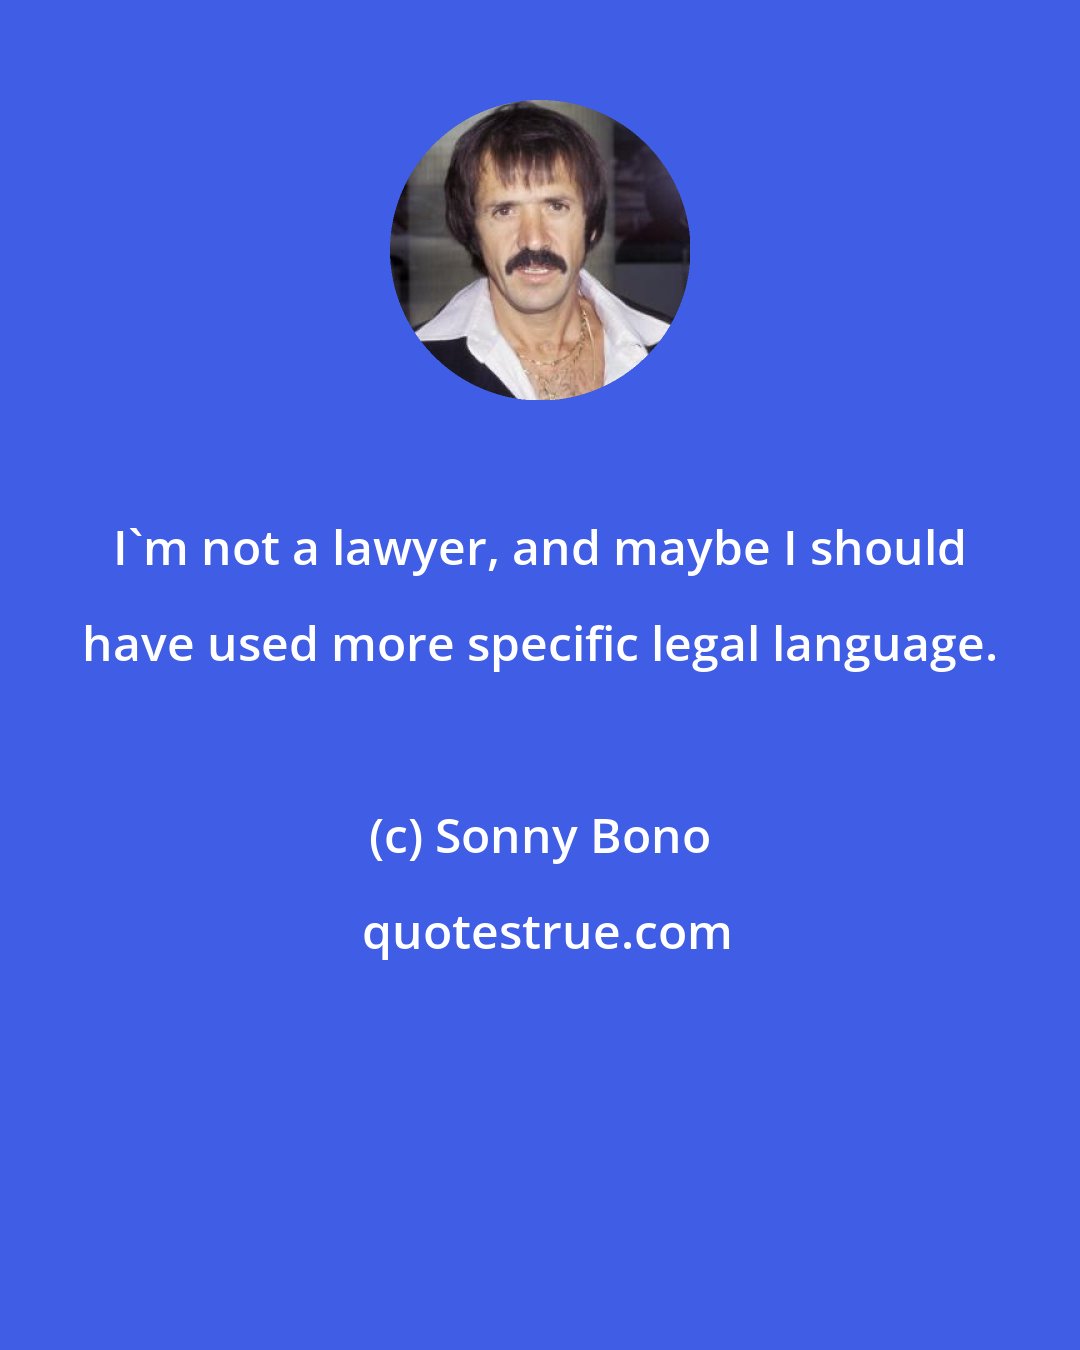 Sonny Bono: I'm not a lawyer, and maybe I should have used more specific legal language.